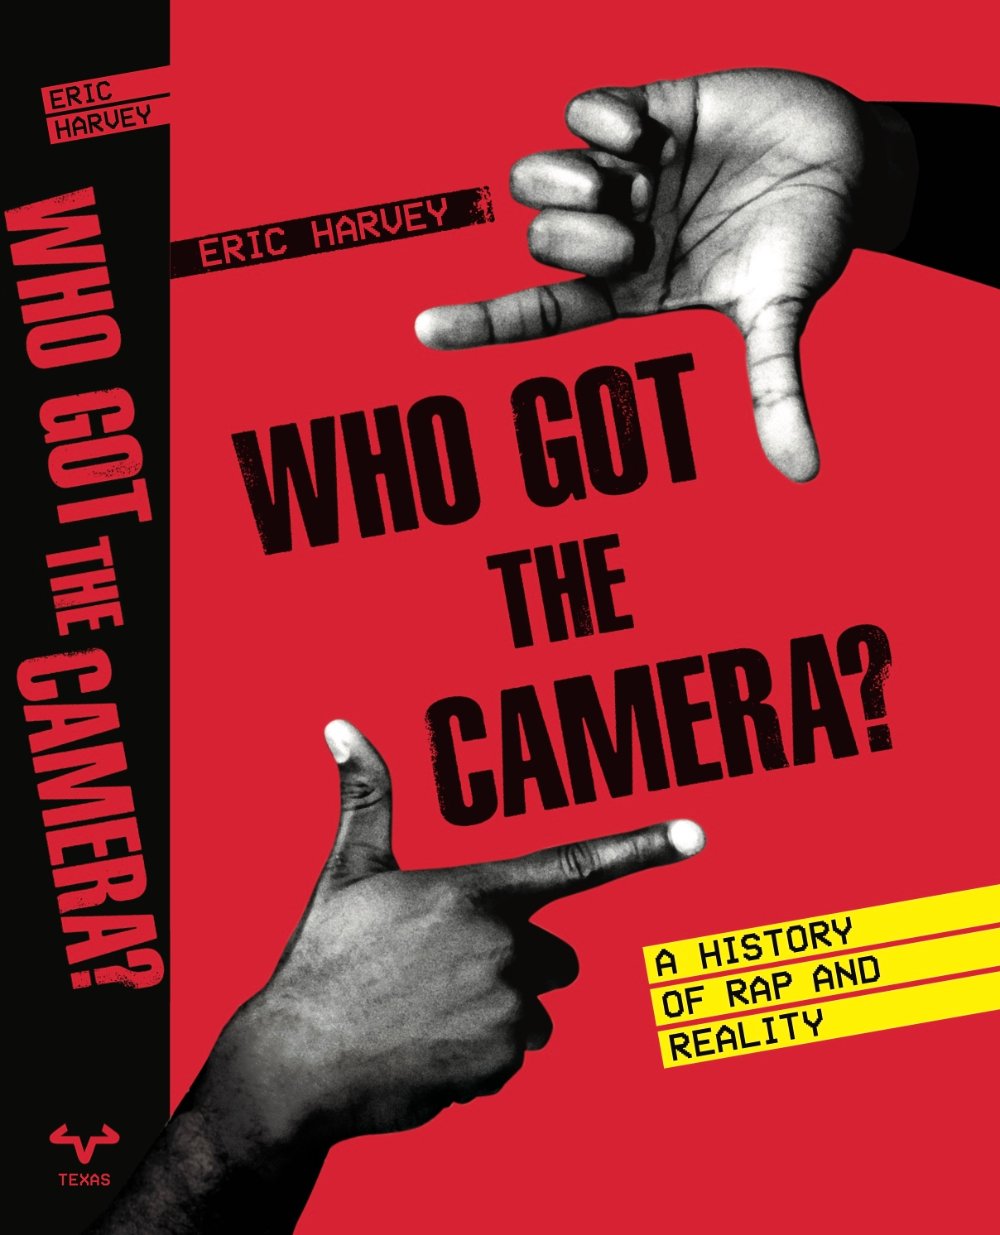 Book cover of "Who Got the Camera: A History of Rap and Reality" by Dr. Eric Harvey